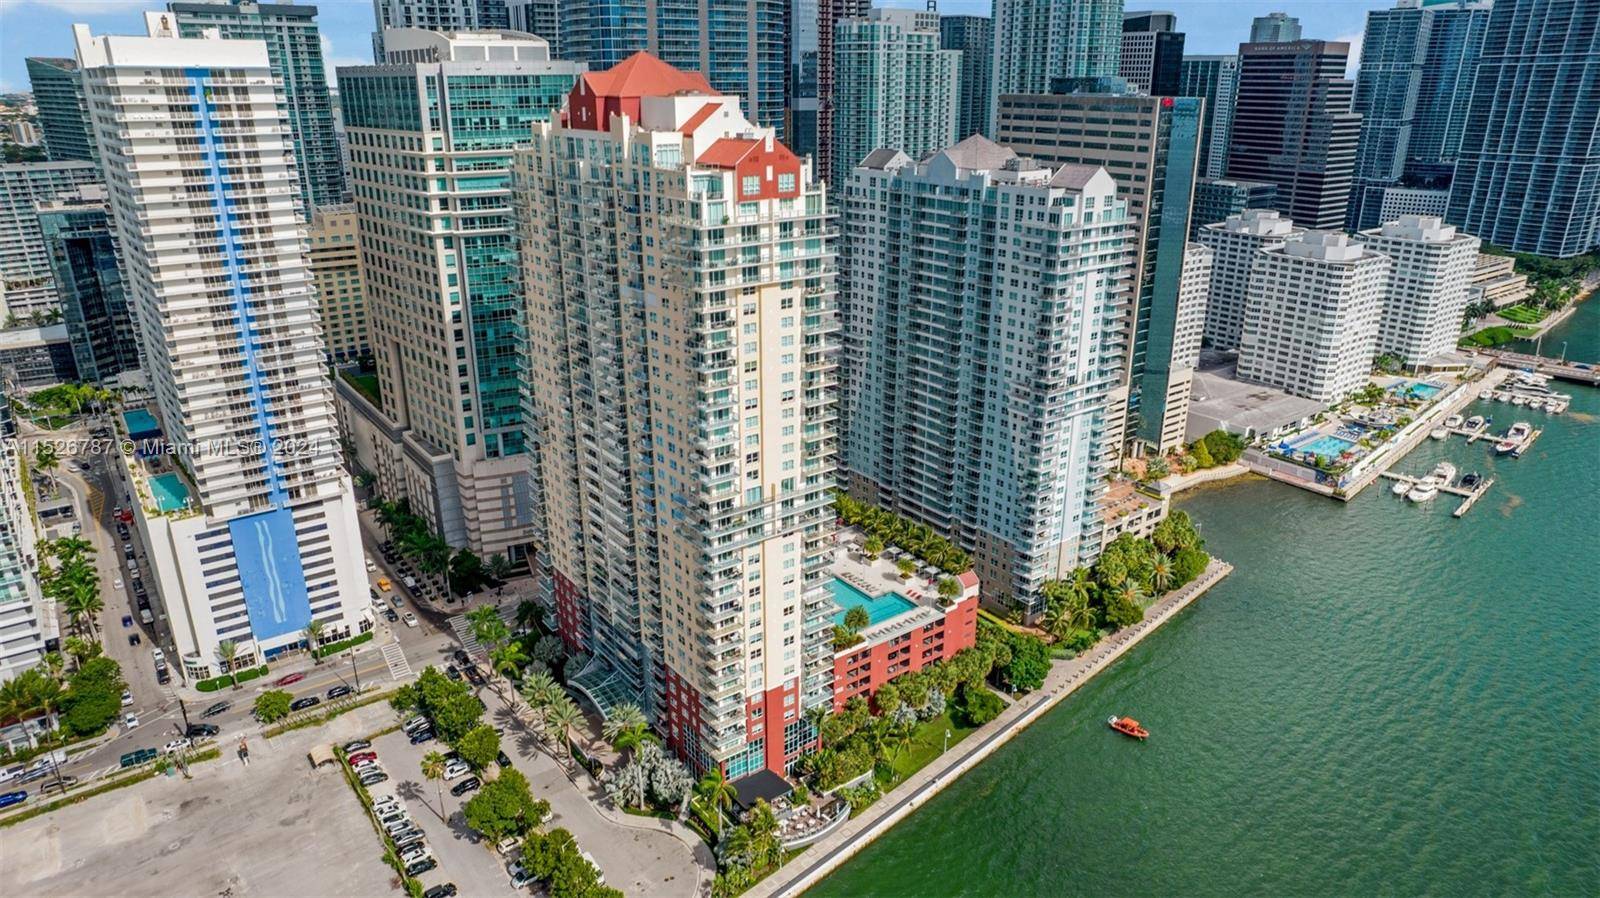 Enjoy the Biscayne Bay View from this beautiful fully furnished 1 1 unit with balcony.